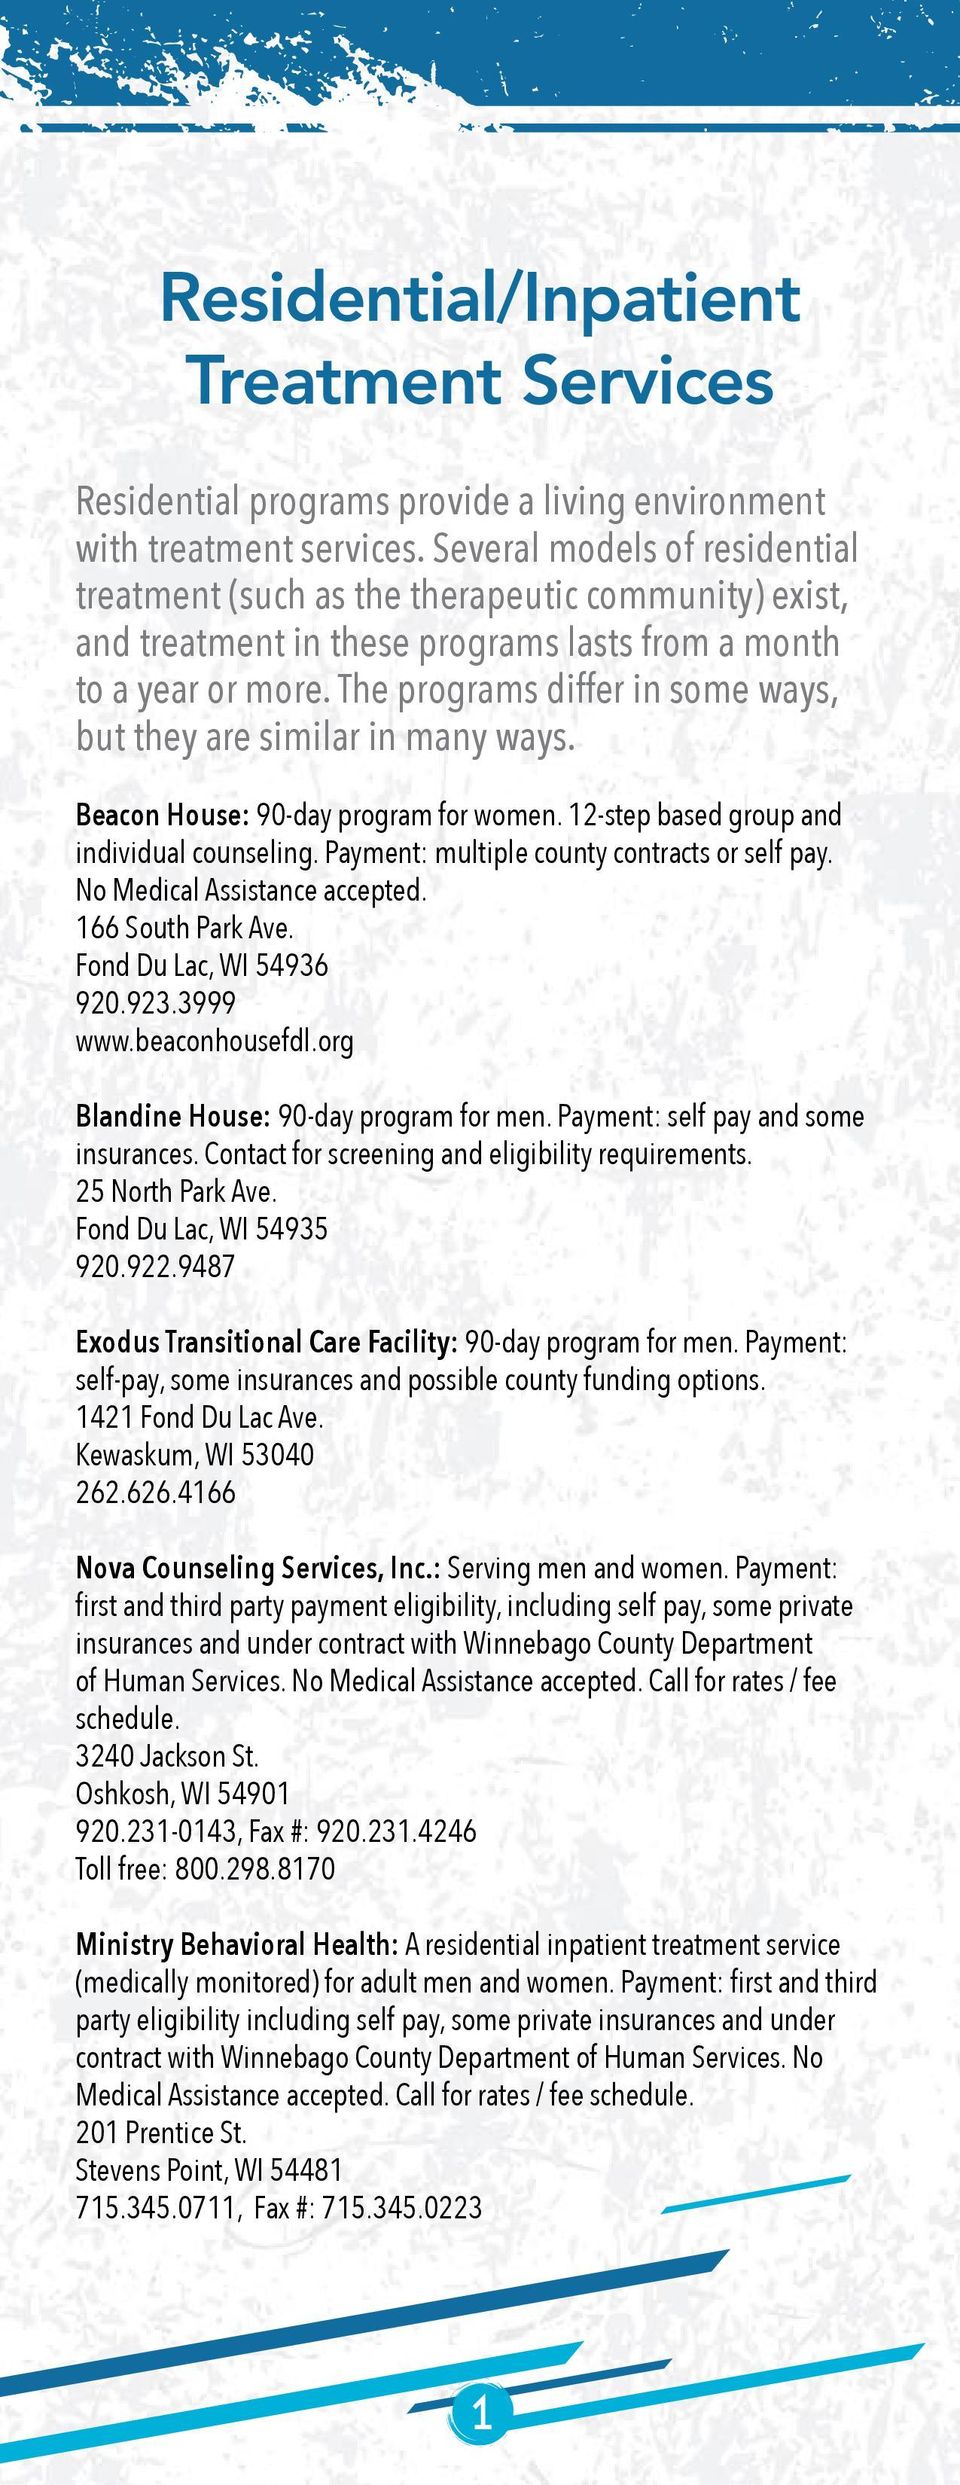 The programs differ in some ways, but they are similar in many ways. Beacon House: 90-day program for women. 12-step based group and individual counseling.